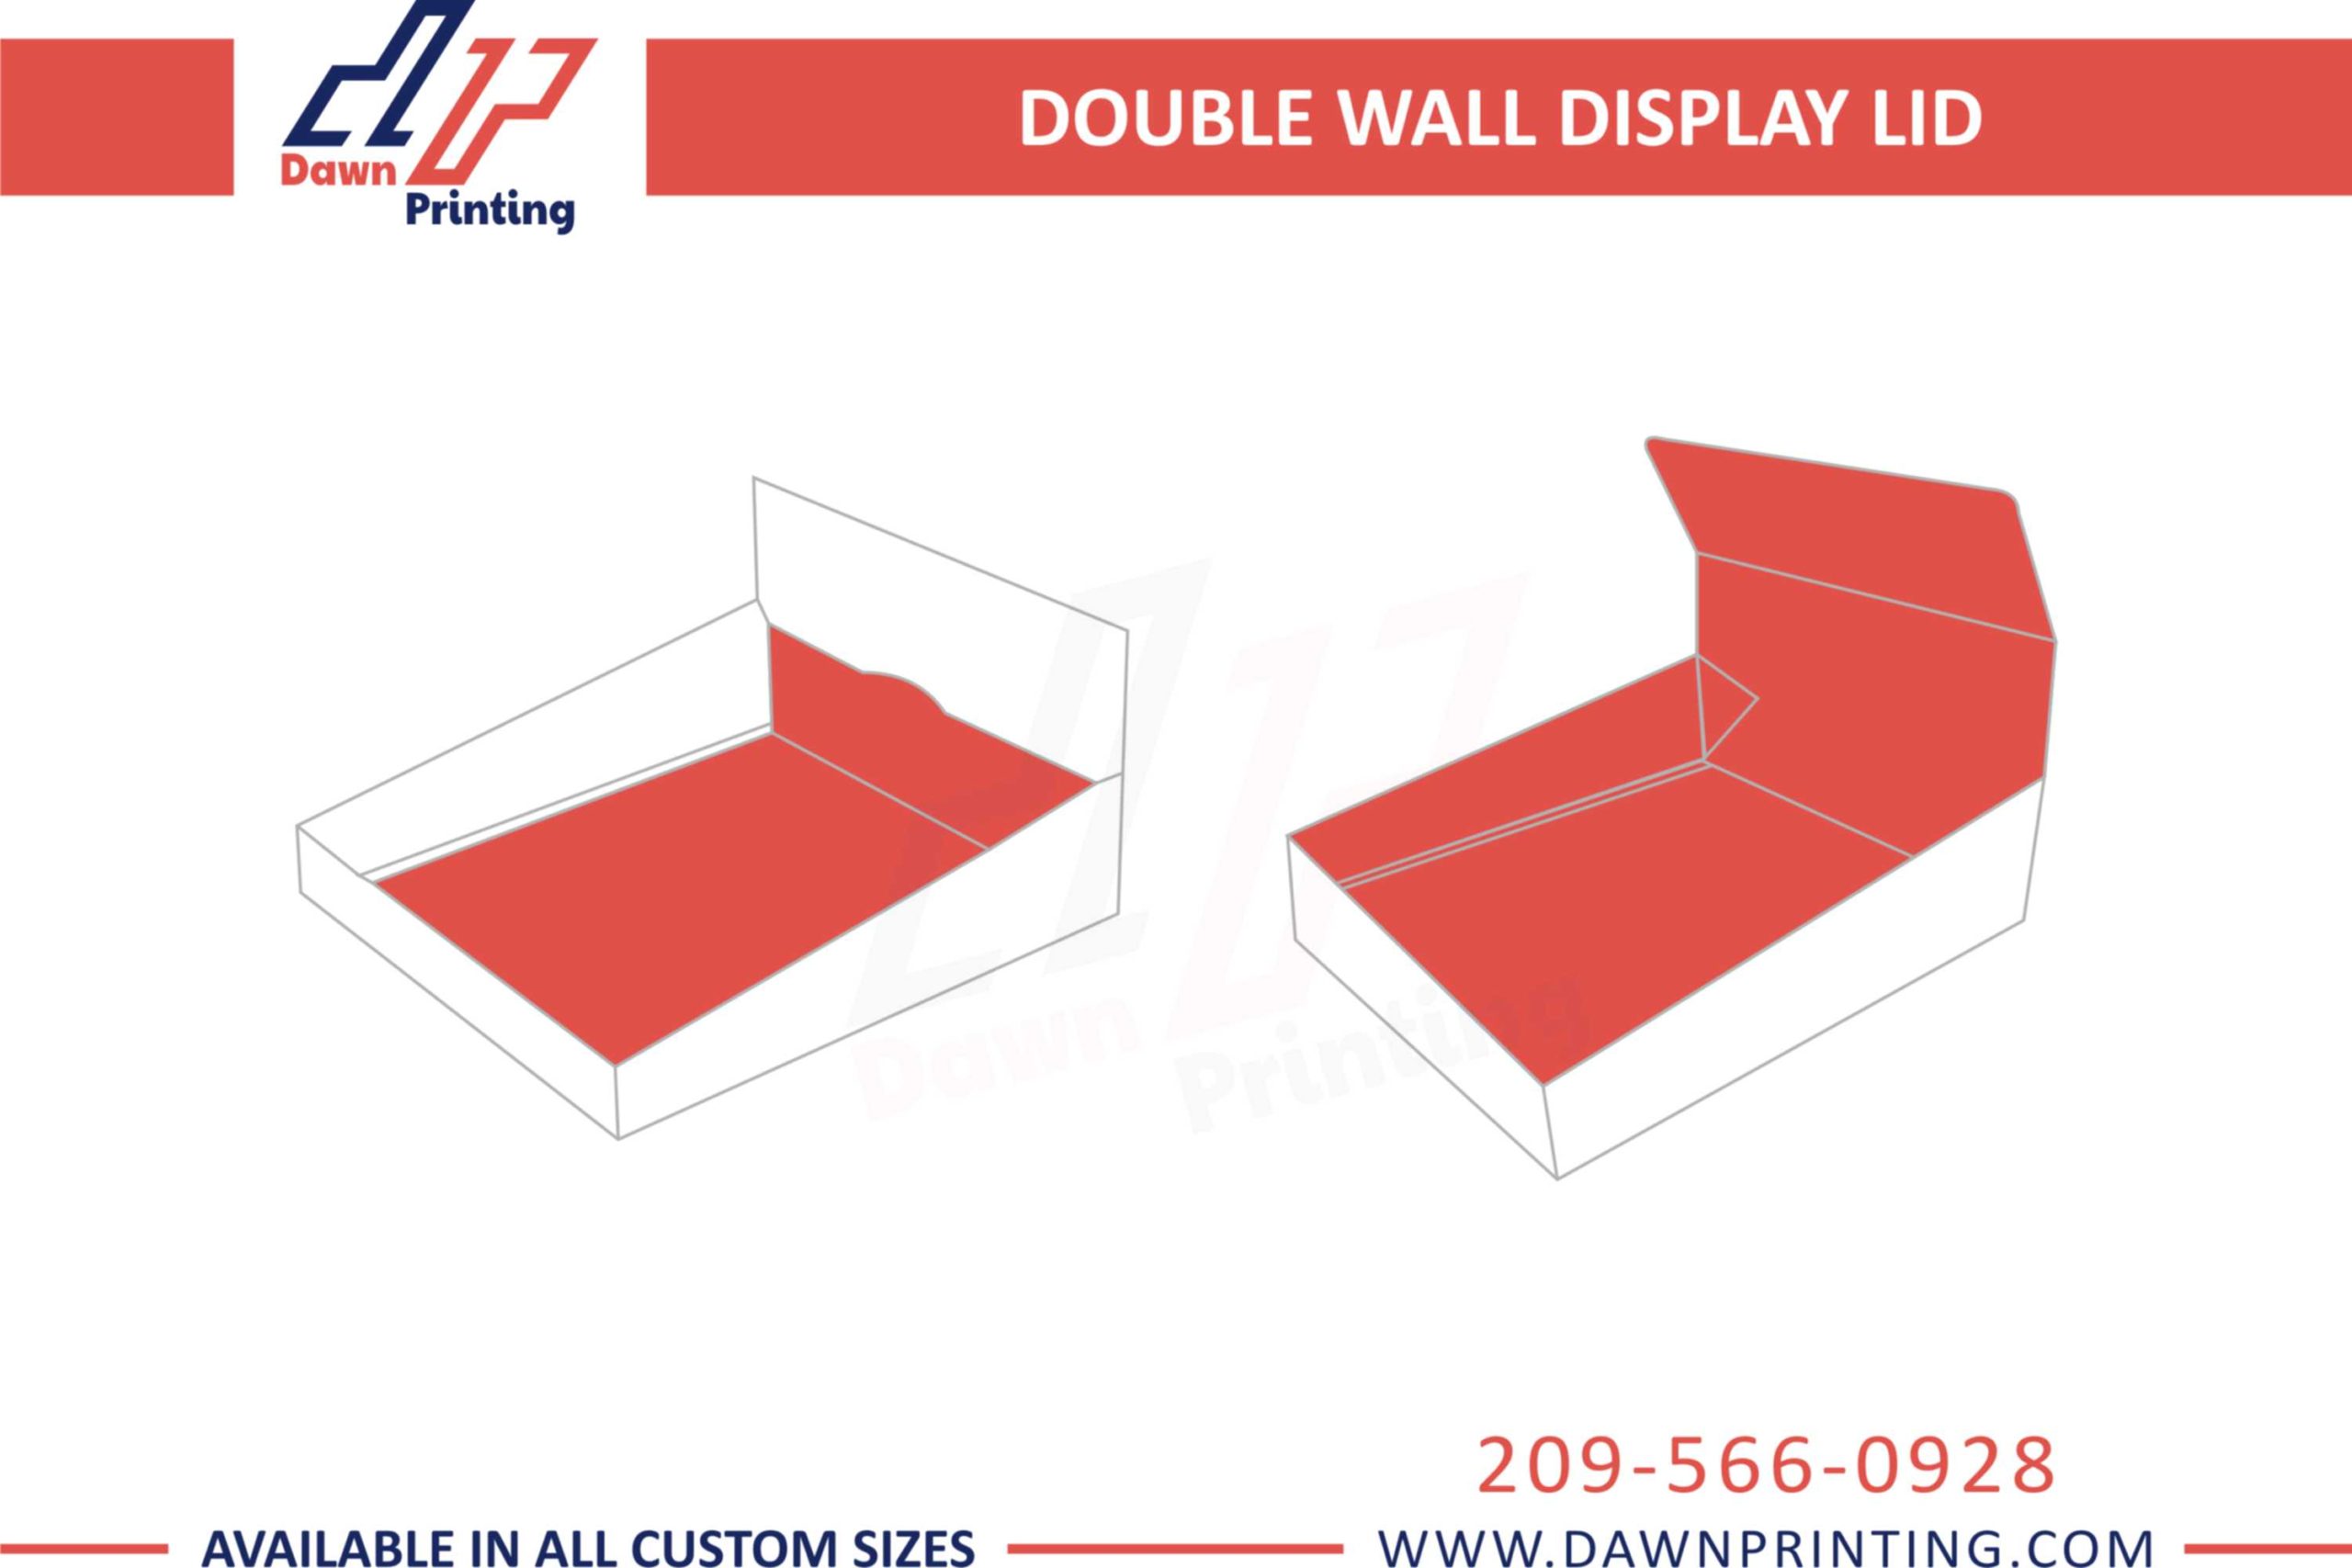 Double Wall With Display Lid - Dawn Printing